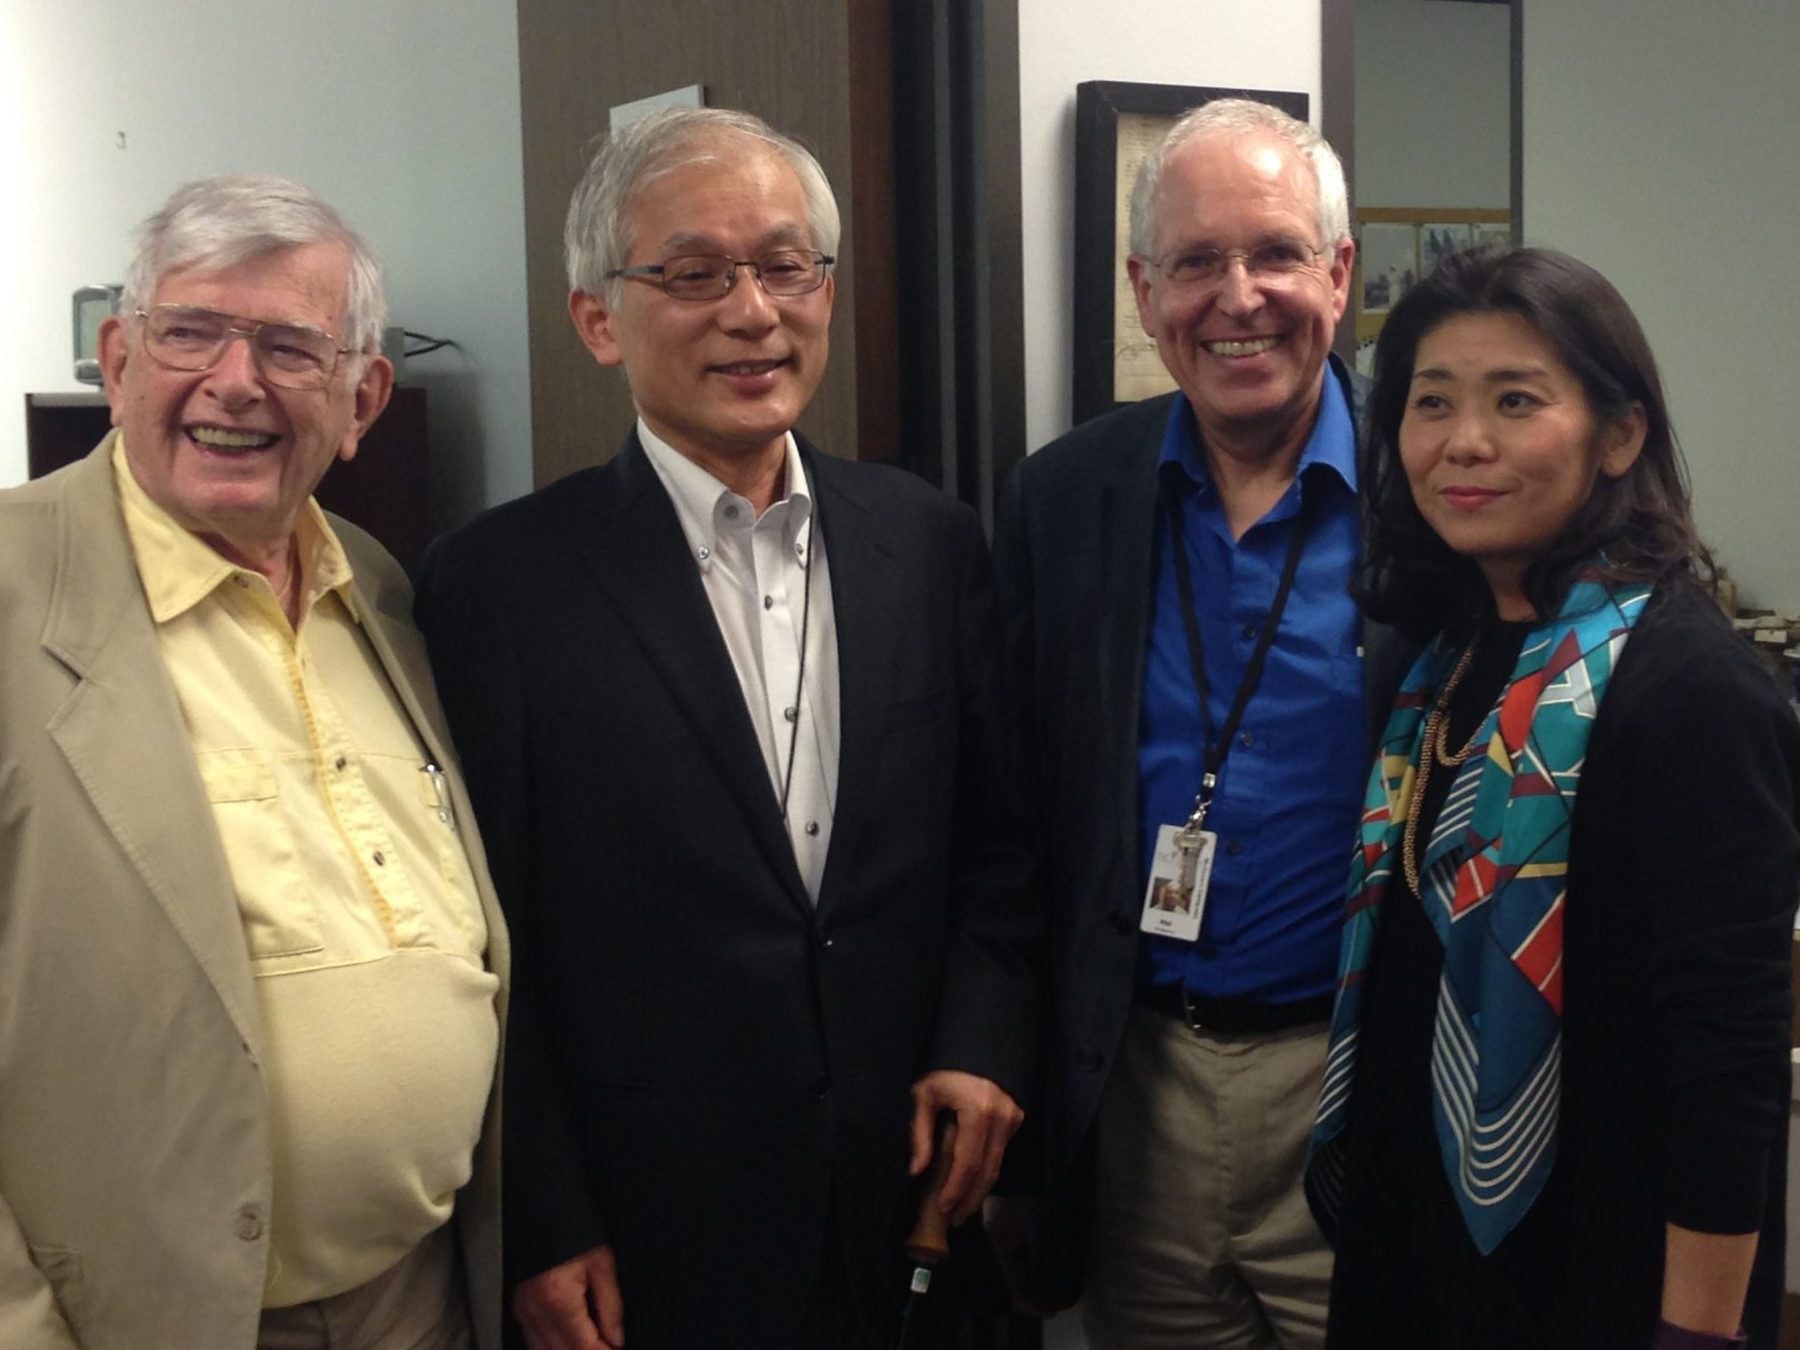 Left to right, William J. Schull, Ph.D., professor emeritus of genetics and epidemiology at the School of Public Health at The University of Texas Health Science Center at Houston; Masahito Ando, Ph.D., a professor of archival science at Gakushuin University in Tokyo, Japan; Philip Montgomery, MLIS, CA, head of the TMC Library's McGovern Historical Center; and archivist and historian Kaori Maekawa. (Credit: Maggie Galehouse, TMC News)